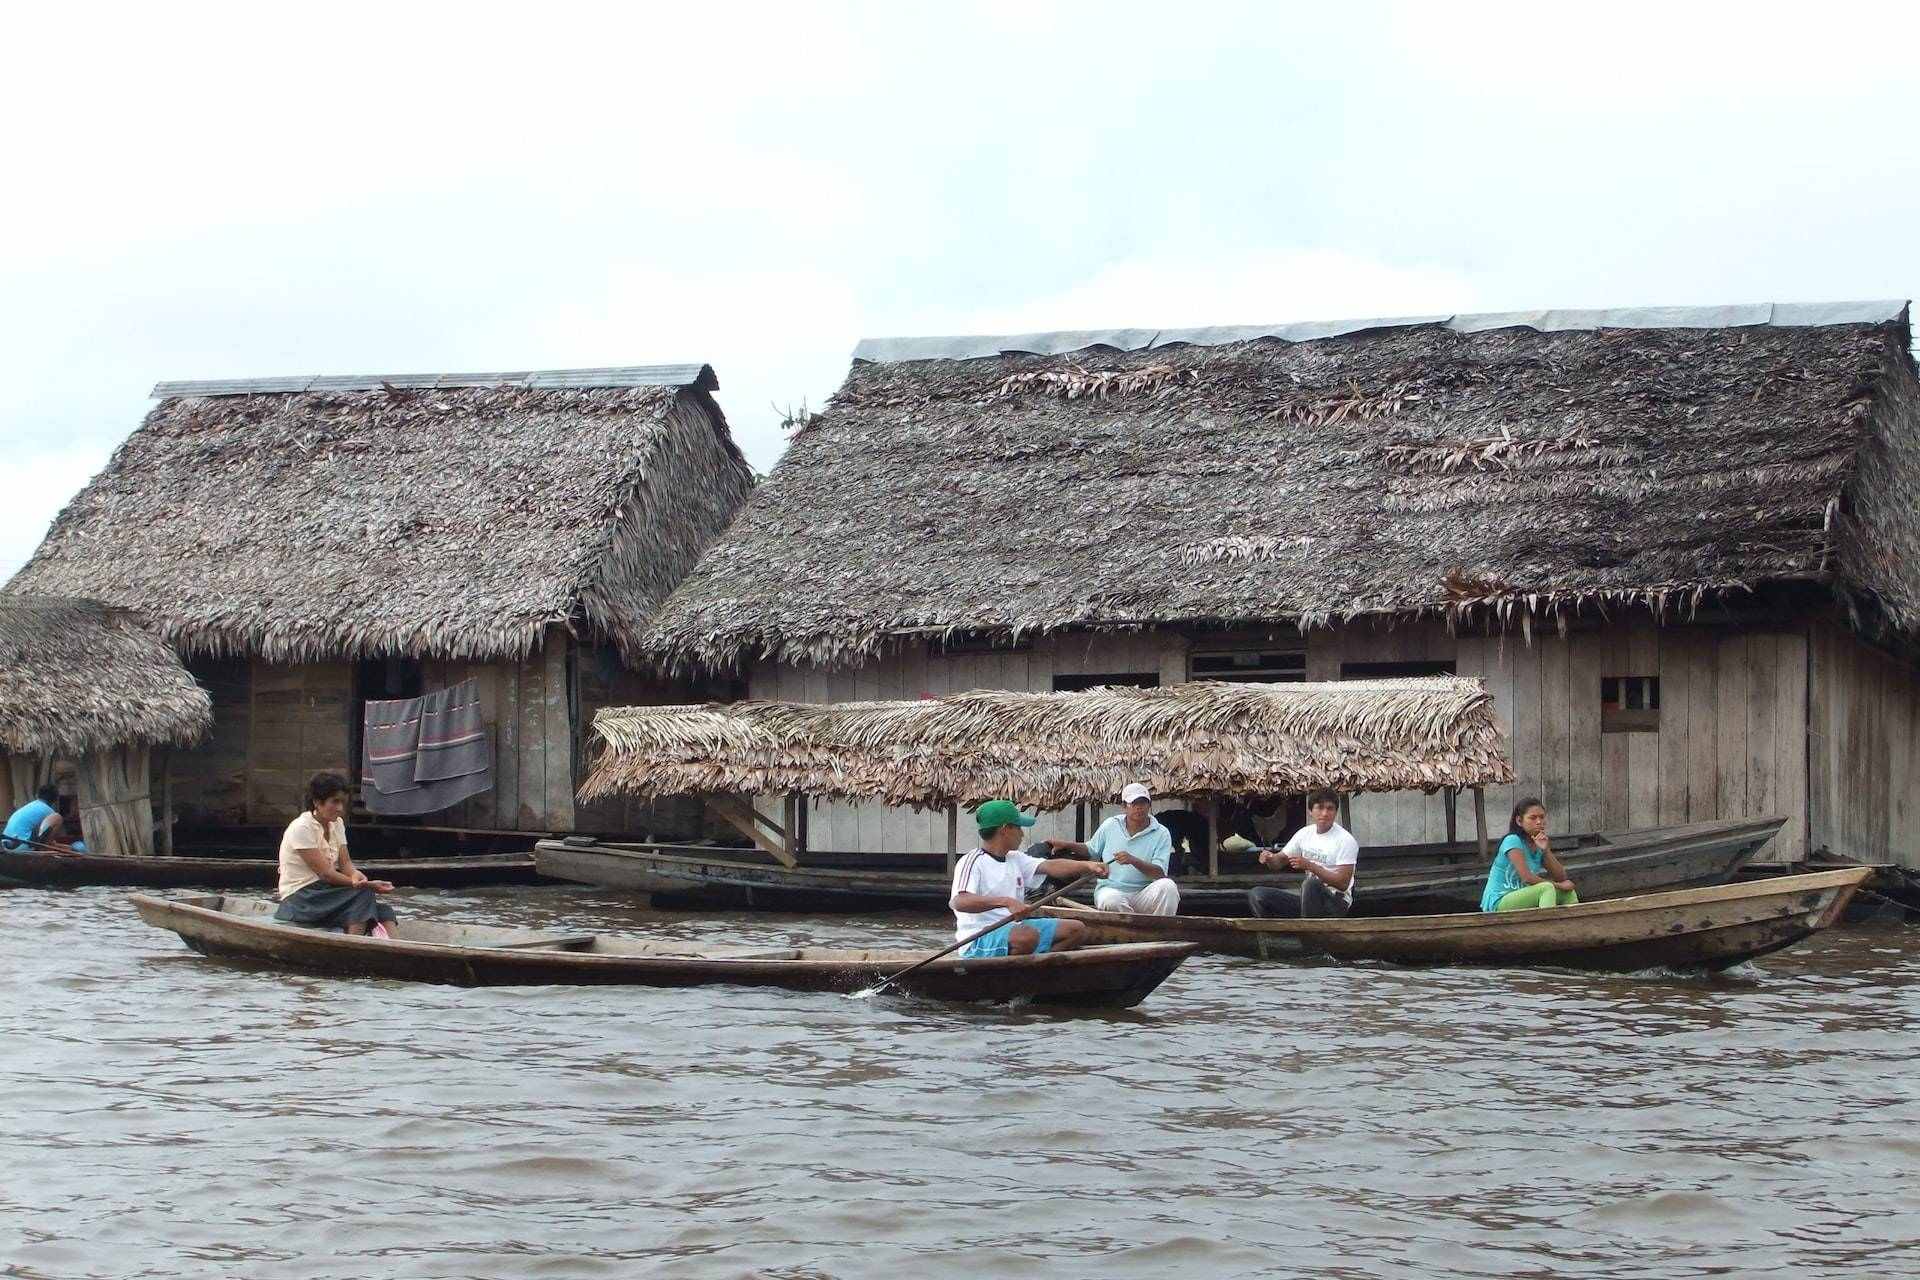 people riding on boat near brown wooden house during daytime